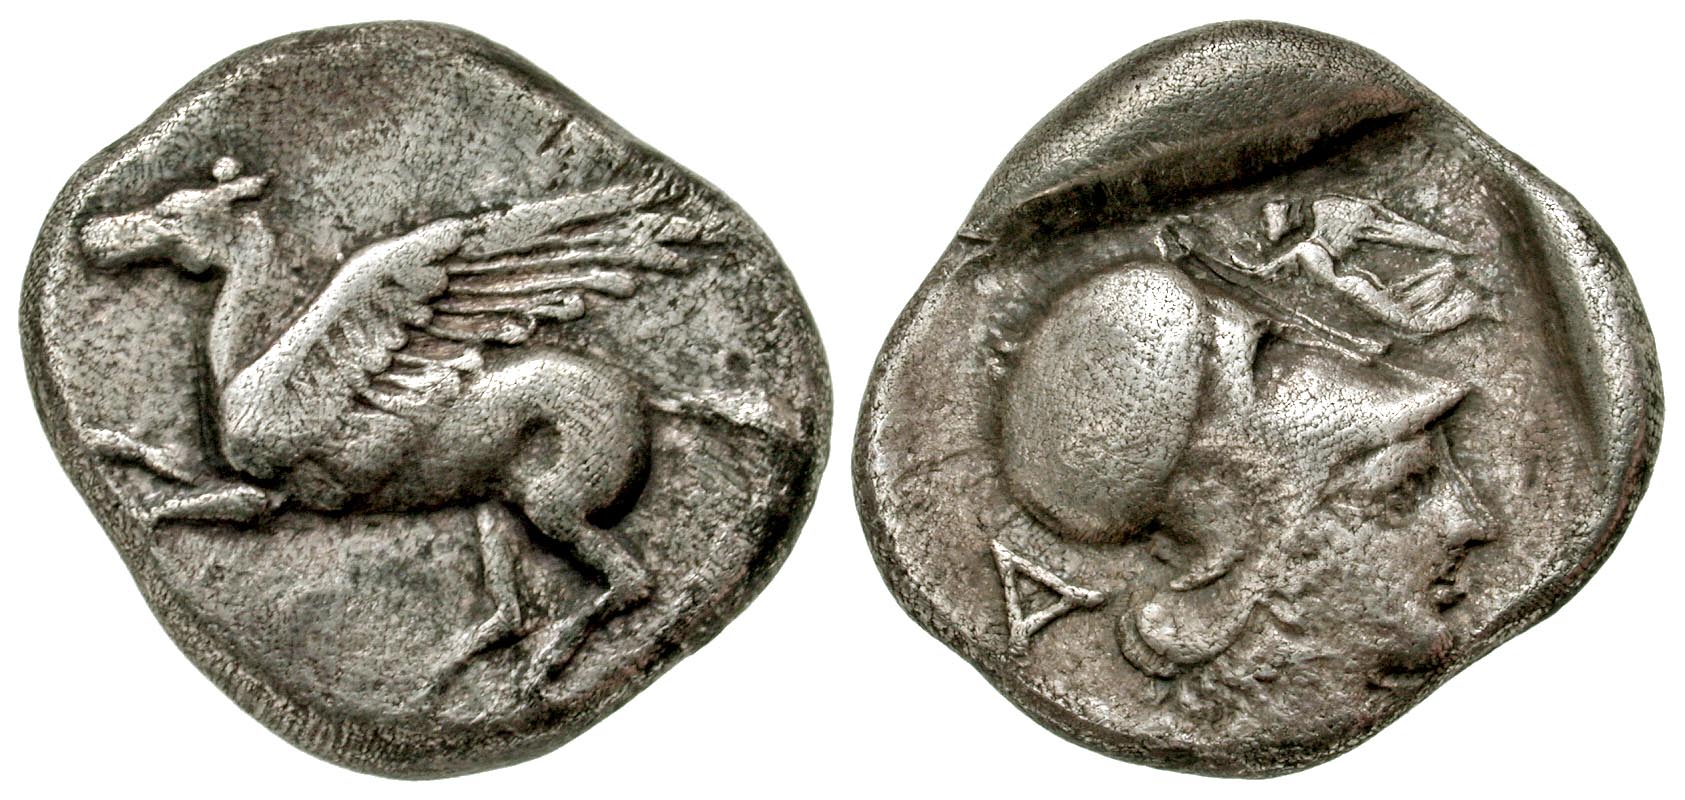 Epeiros, Ambrakia. Ca. 456-426 B.C. AR stater. From the D. Thomas Collection. 